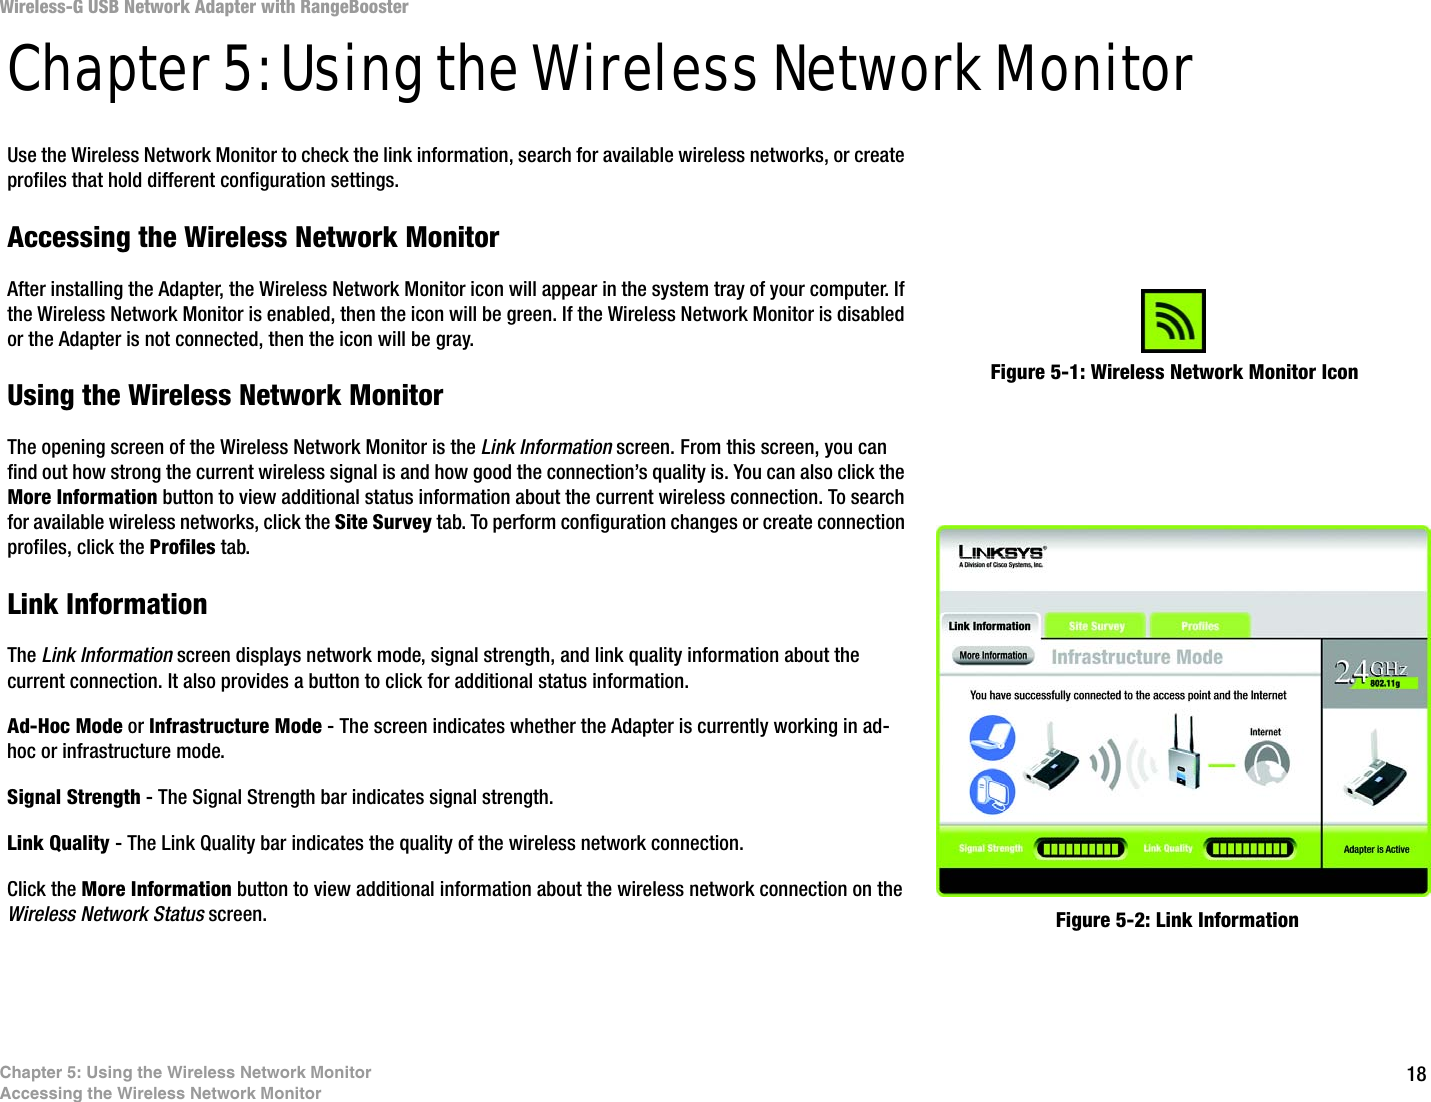 18Chapter 5: Using the Wireless Network MonitorAccessing the Wireless Network MonitorWireless-G USB Network Adapter with RangeBoosterChapter 5: Using the Wireless Network MonitorUse the Wireless Network Monitor to check the link information, search for available wireless networks, or create profiles that hold different configuration settings.Accessing the Wireless Network MonitorAfter installing the Adapter, the Wireless Network Monitor icon will appear in the system tray of your computer. If the Wireless Network Monitor is enabled, then the icon will be green. If the Wireless Network Monitor is disabled or the Adapter is not connected, then the icon will be gray.Using the Wireless Network MonitorThe opening screen of the Wireless Network Monitor is the Link Information screen. From this screen, you can find out how strong the current wireless signal is and how good the connection’s quality is. You can also click the More Information button to view additional status information about the current wireless connection. To search for available wireless networks, click the Site Survey tab. To perform configuration changes or create connection profiles, click the Profiles tab.Link InformationThe Link Information screen displays network mode, signal strength, and link quality information about the current connection. It also provides a button to click for additional status information.Ad-Hoc Mode or Infrastructure Mode - The screen indicates whether the Adapter is currently working in ad-hoc or infrastructure mode.Signal Strength - The Signal Strength bar indicates signal strength. Link Quality - The Link Quality bar indicates the quality of the wireless network connection.Click the More Information button to view additional information about the wireless network connection on the Wireless Network Status screen.Figure 5-1: Wireless Network Monitor IconFigure 5-2: Link Information